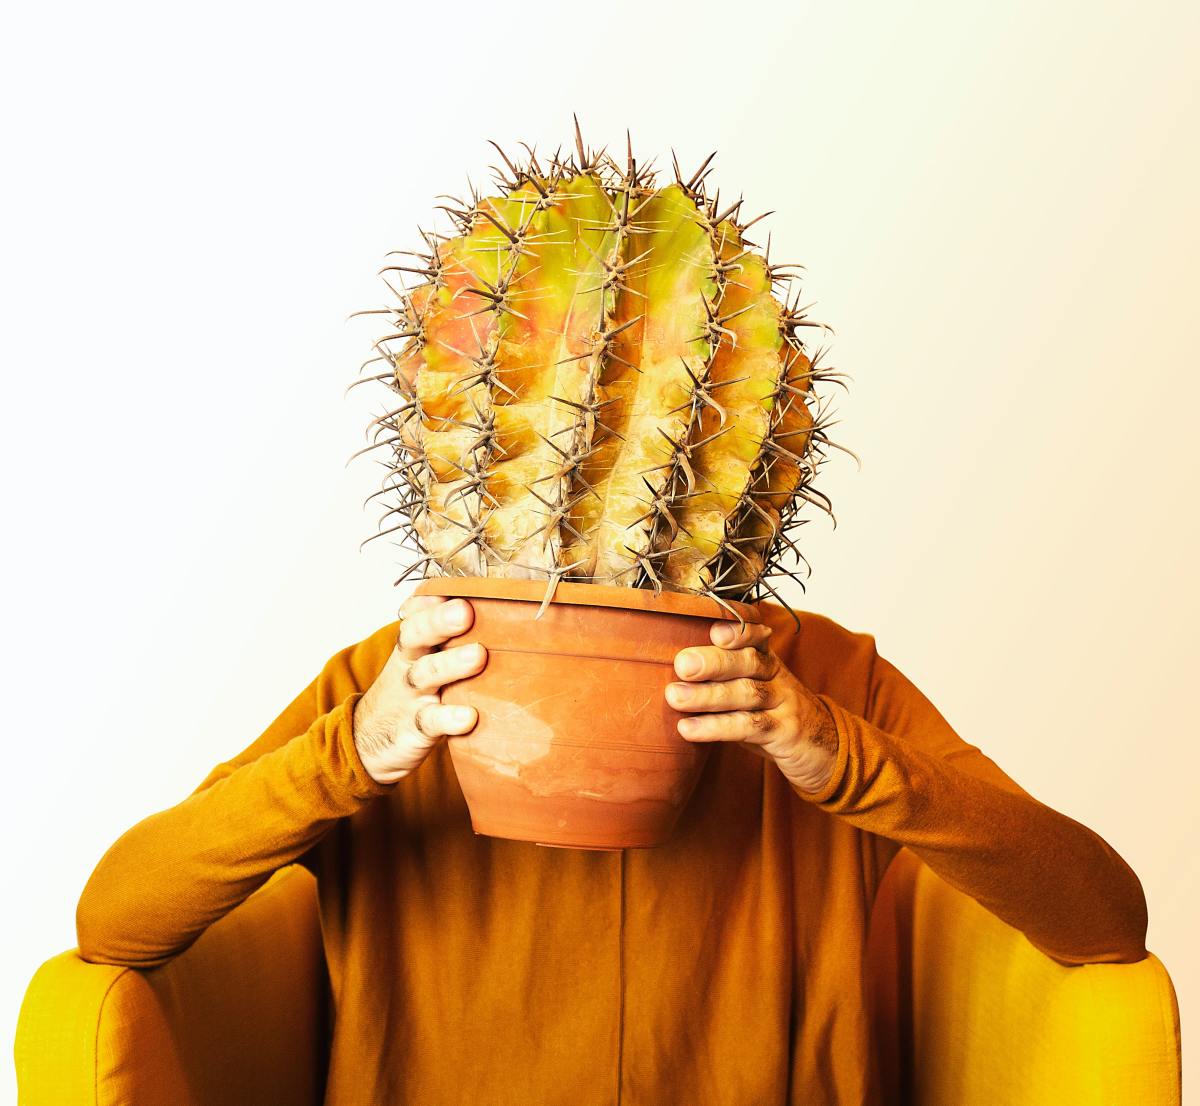 "The person who loses must carry around the biggest cactus they can find all day long."